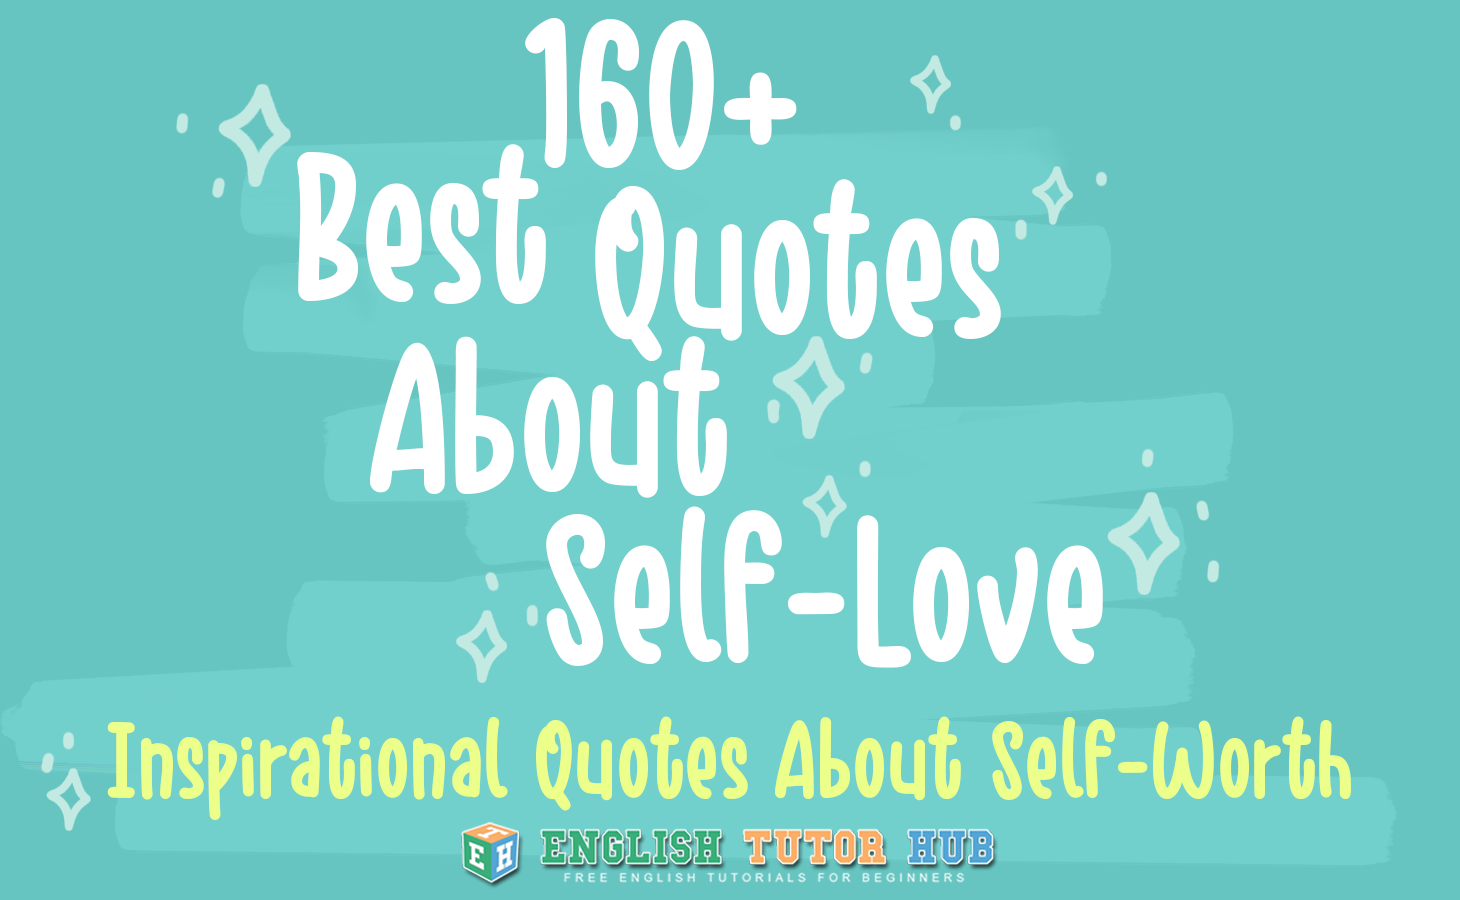 160+ Best Quotes About Self-Love - Inspirational Quotes About Self-Worth